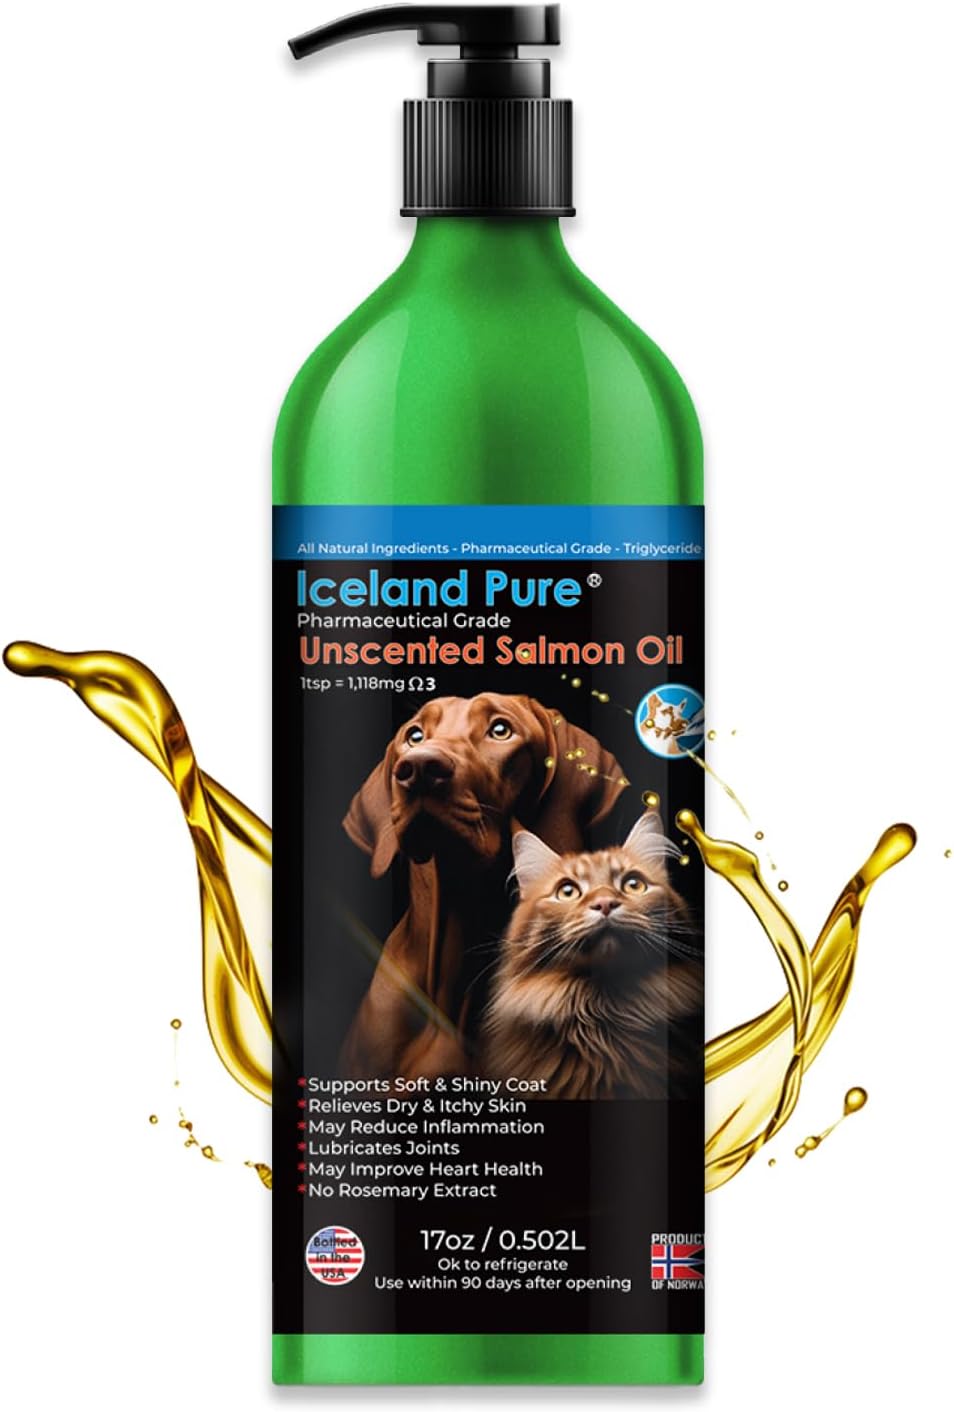 Salmon Oil | Unscented Pharmaceutical Grade | 1118mg of Omega-3 per teaspoon | Liquid Food Supplement For Dogs and Cats | BPA-Free Brushed Aluminum Epoxy coated Bottle with Pump 17oz